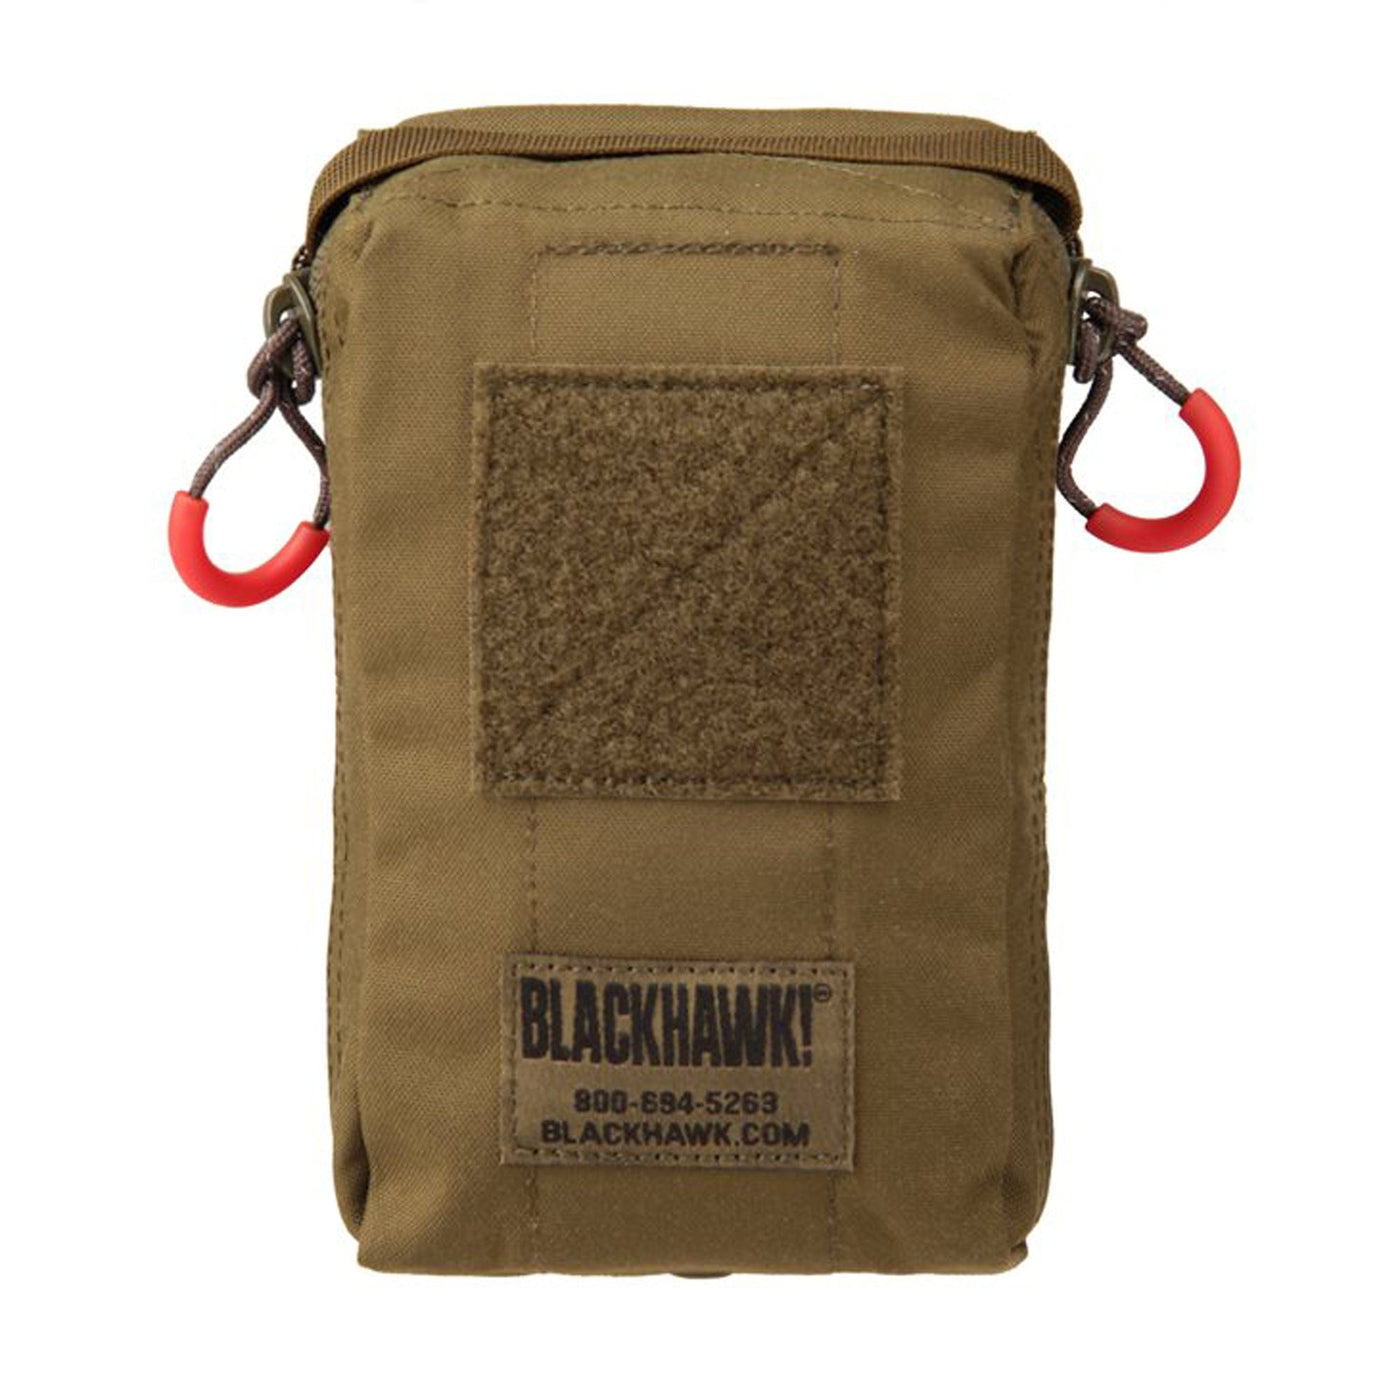 BLACKHAWK Bh Compact Medical Pouch Ct Holsters